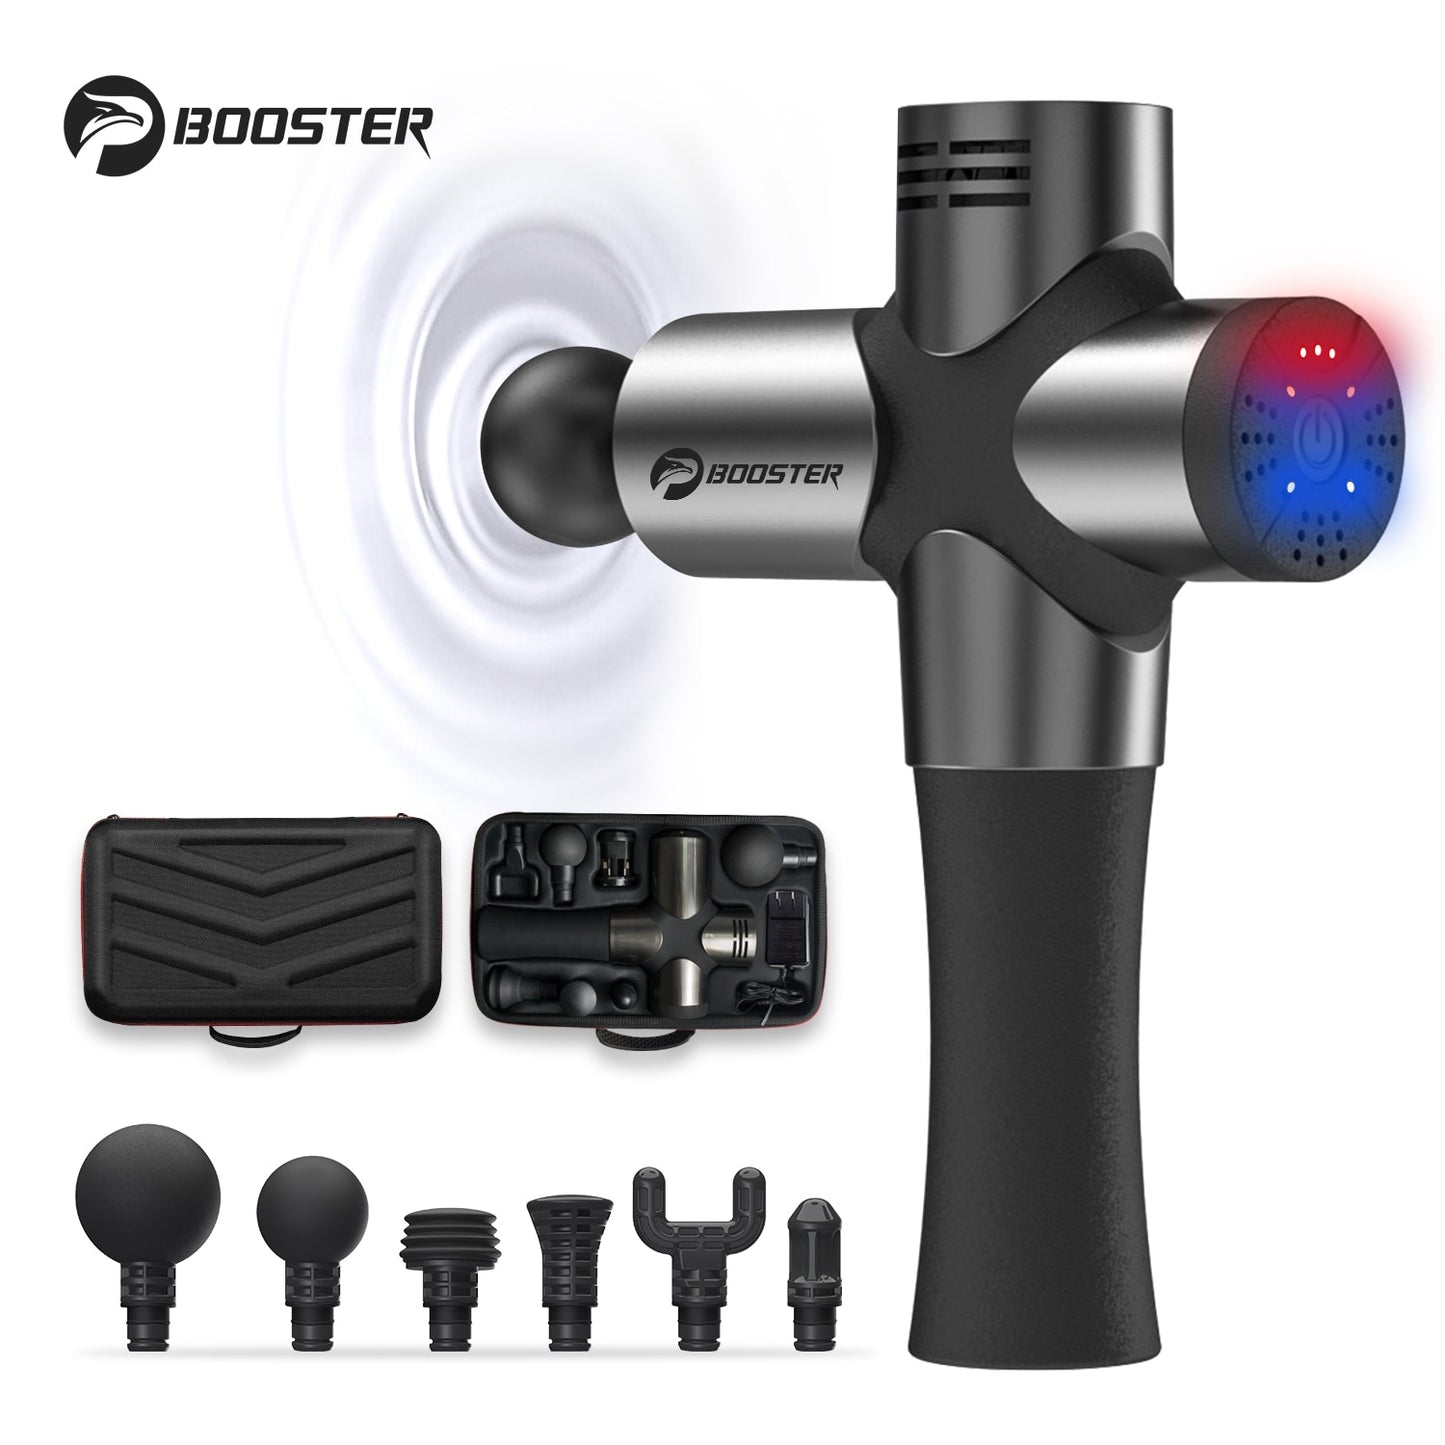 BOOSTER Pro 3 Deep Tissue Massage Gun Muscle Stimulator Body Massager, Fascial Gun Relax Therapy Low Noise for Fitness Shaping